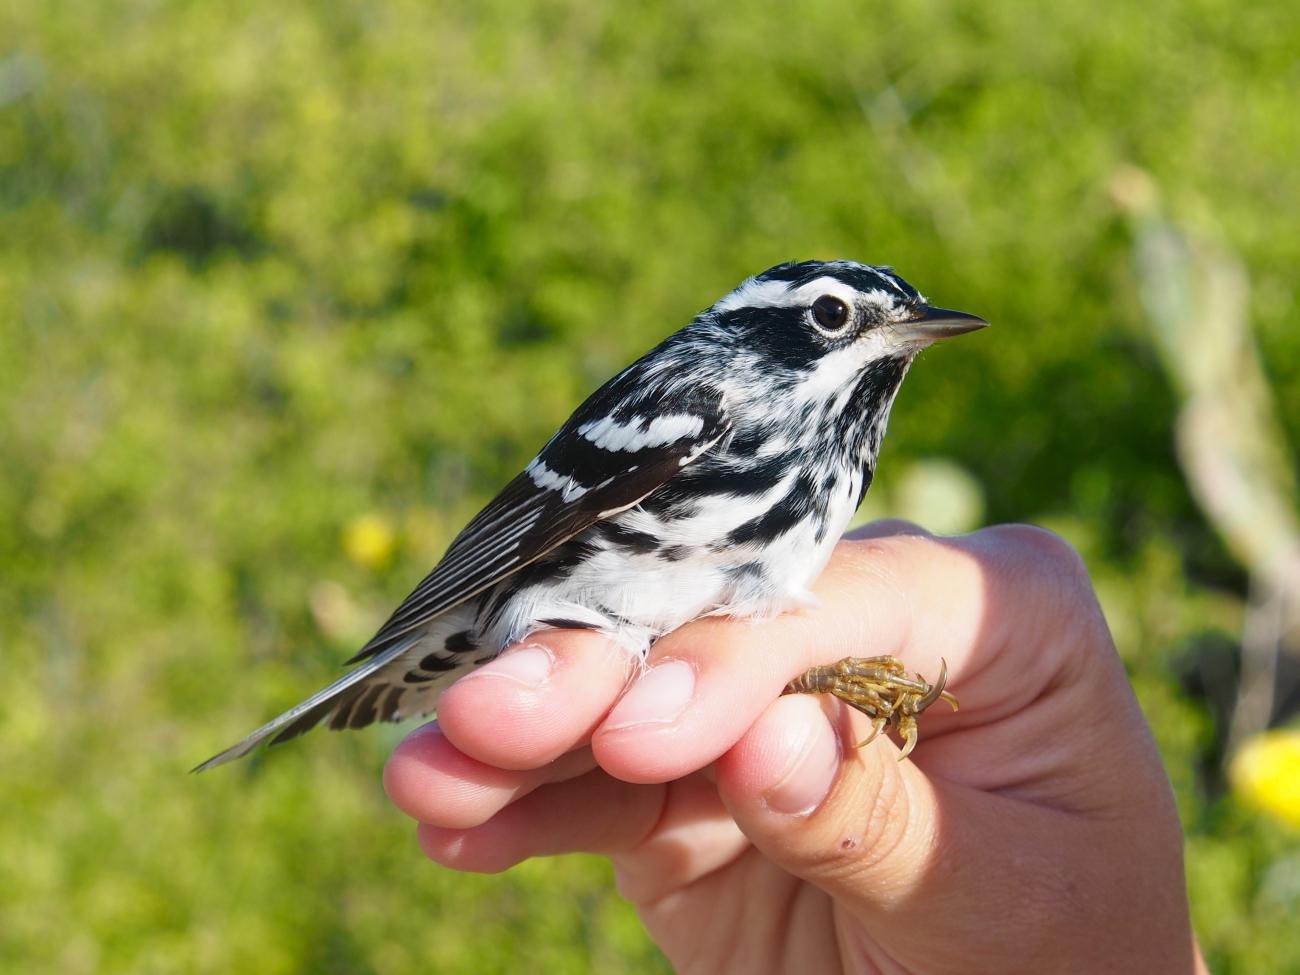 A black and white warbler perches on someone's hand